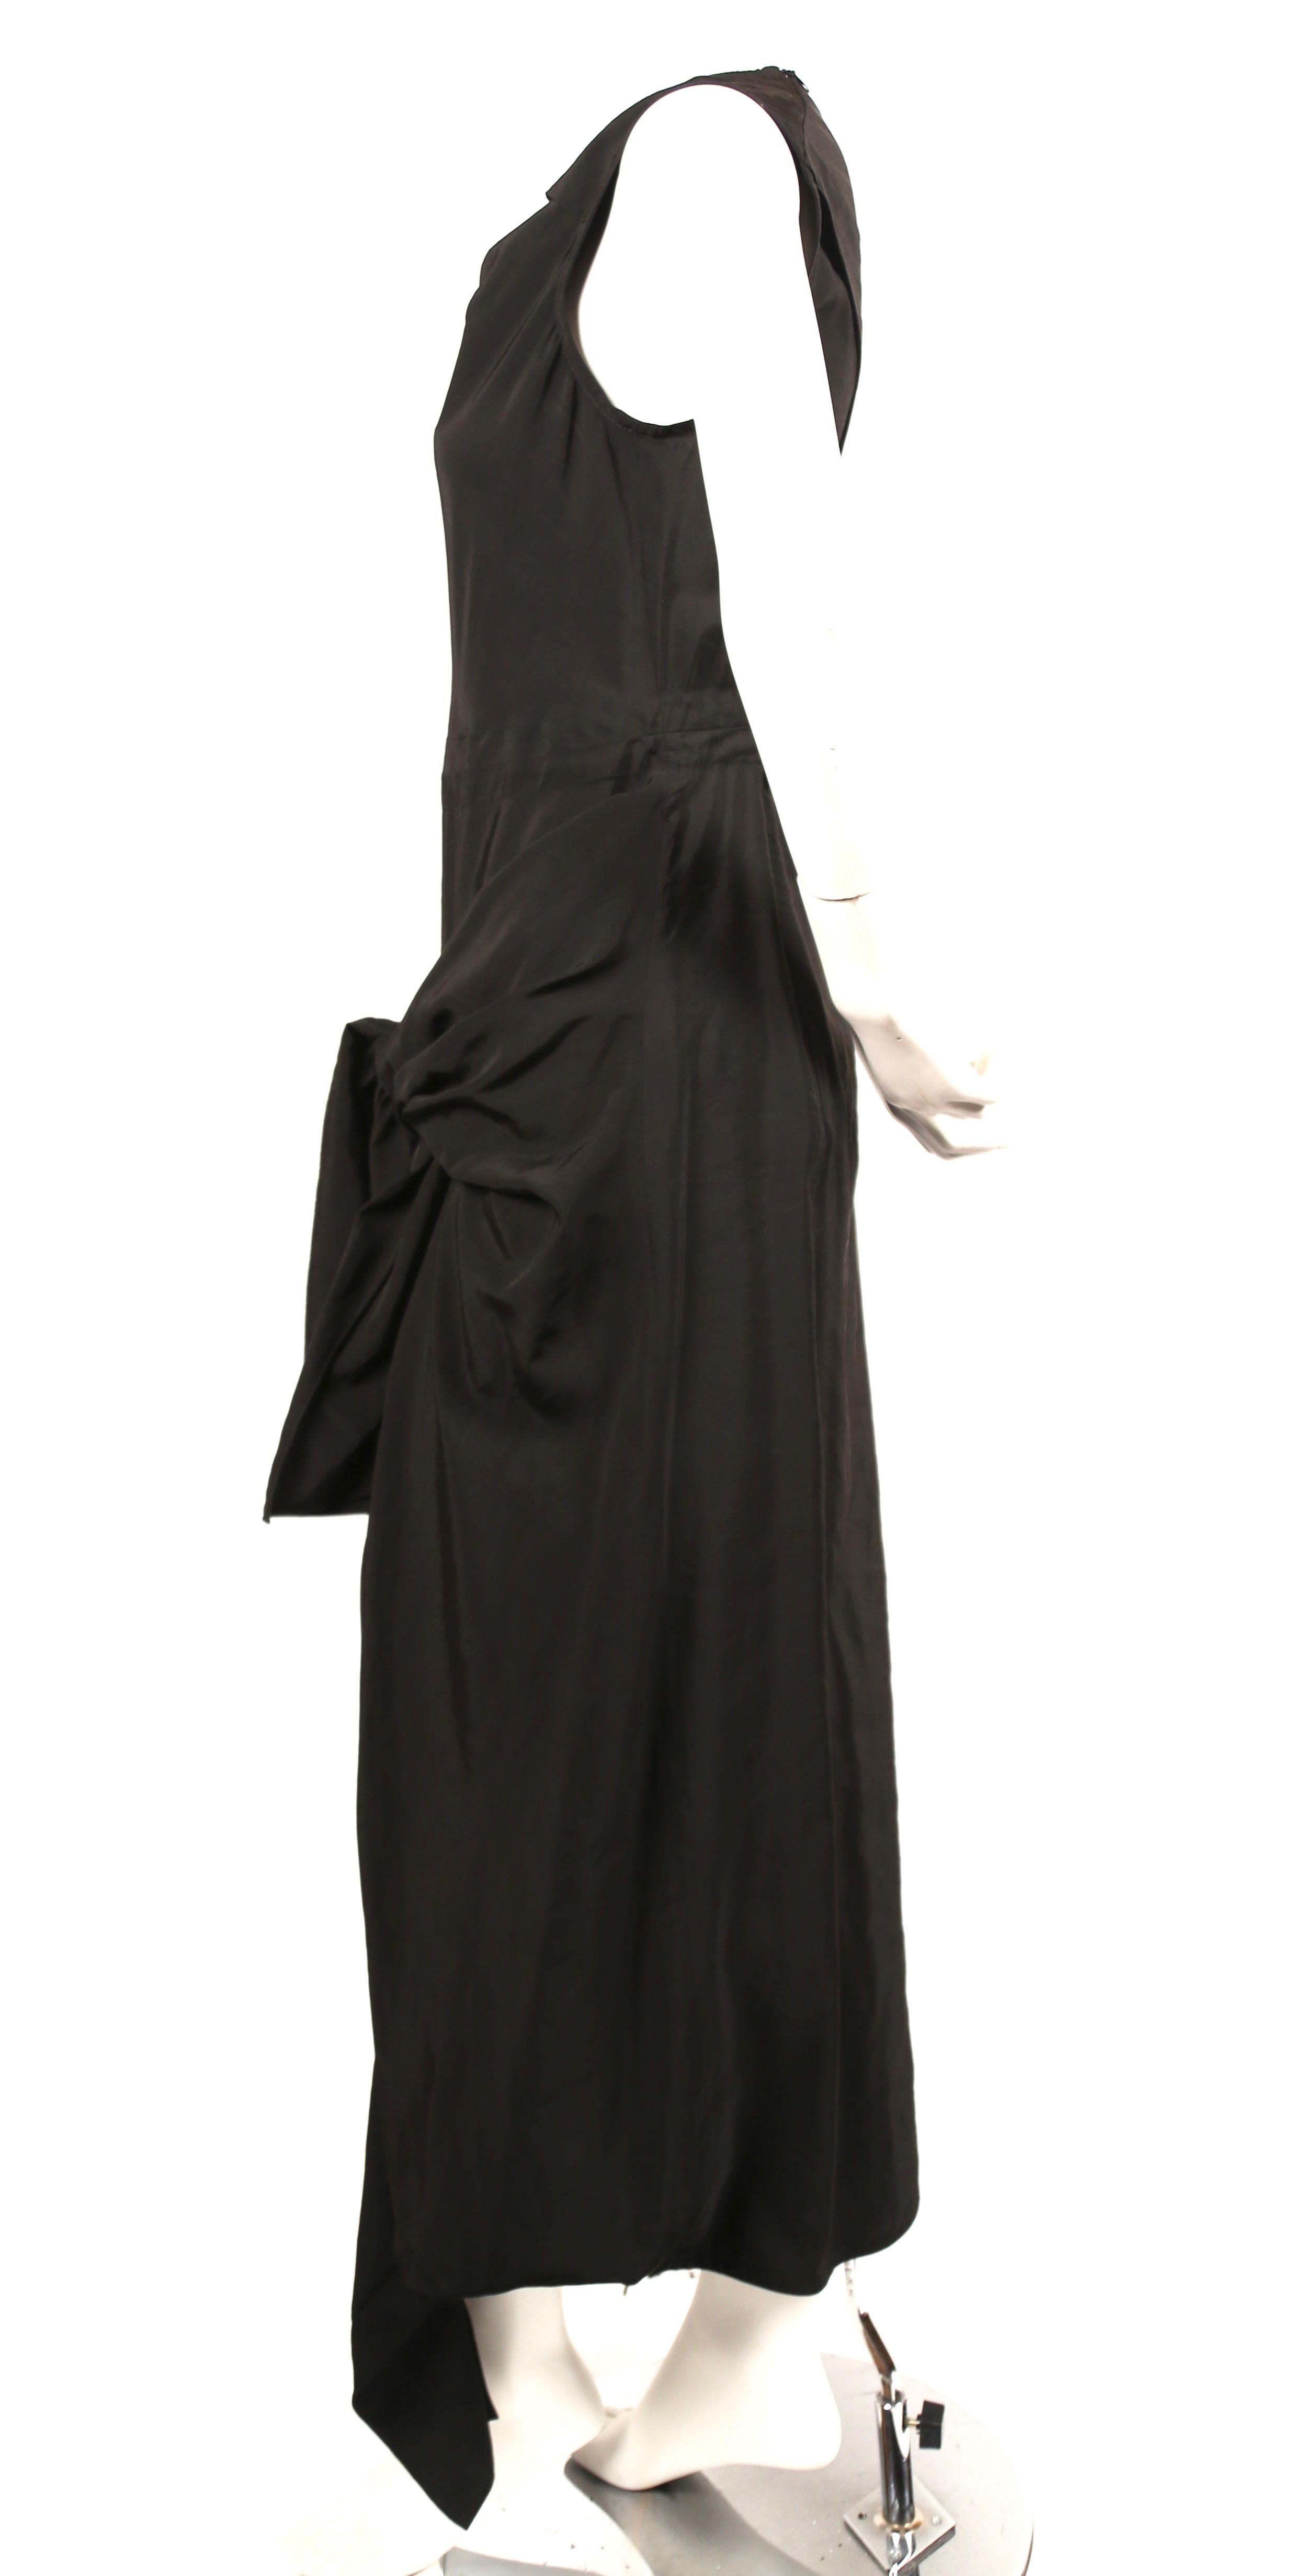 new CELINE By PHOEBE PHILO black dress with ties and cut out back In New Condition For Sale In San Fransisco, CA